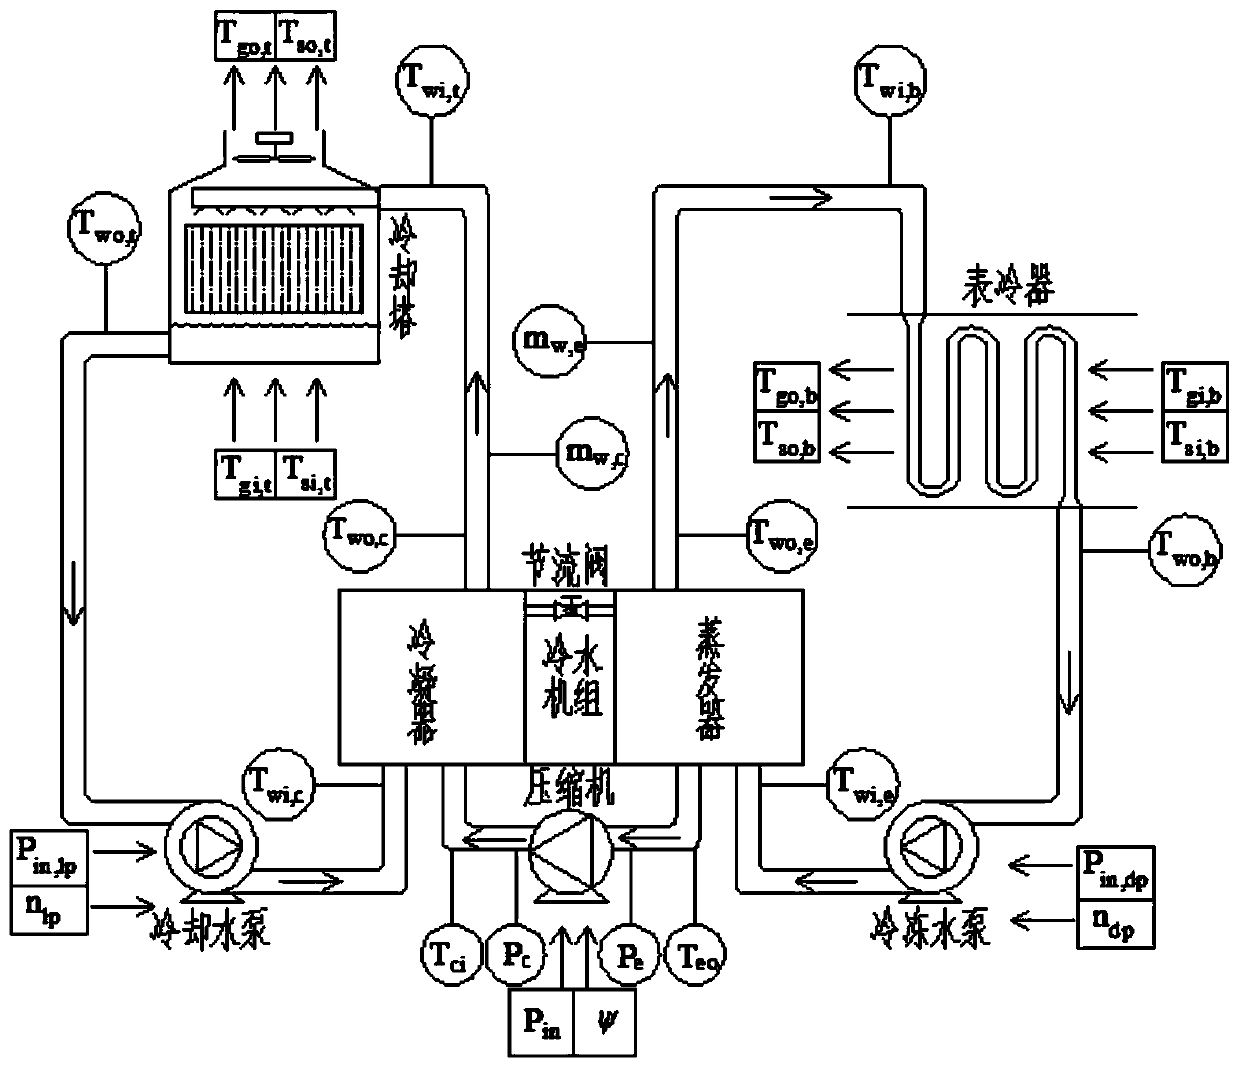 A Simulation Method of Air Conditioning System Based on Feature Recognition